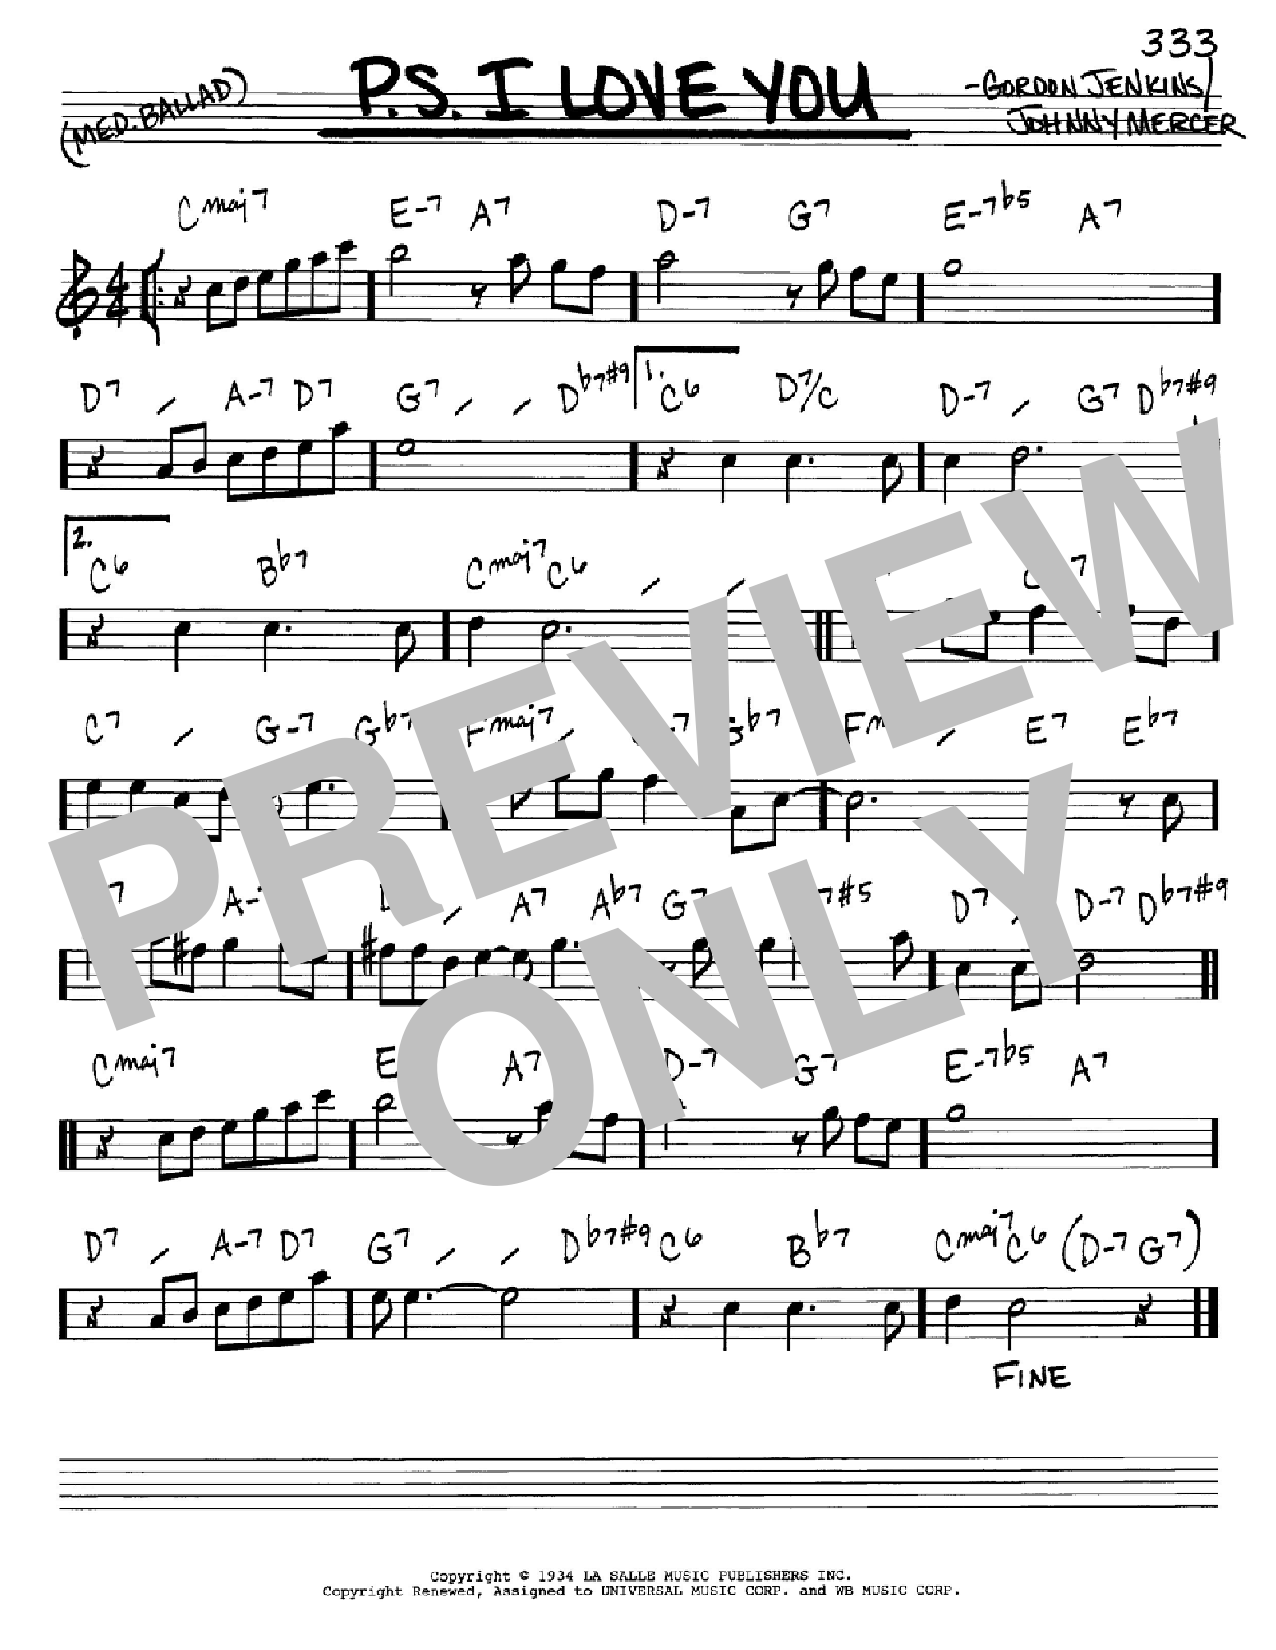 Download The Hilltoppers P.S. I Love You Sheet Music